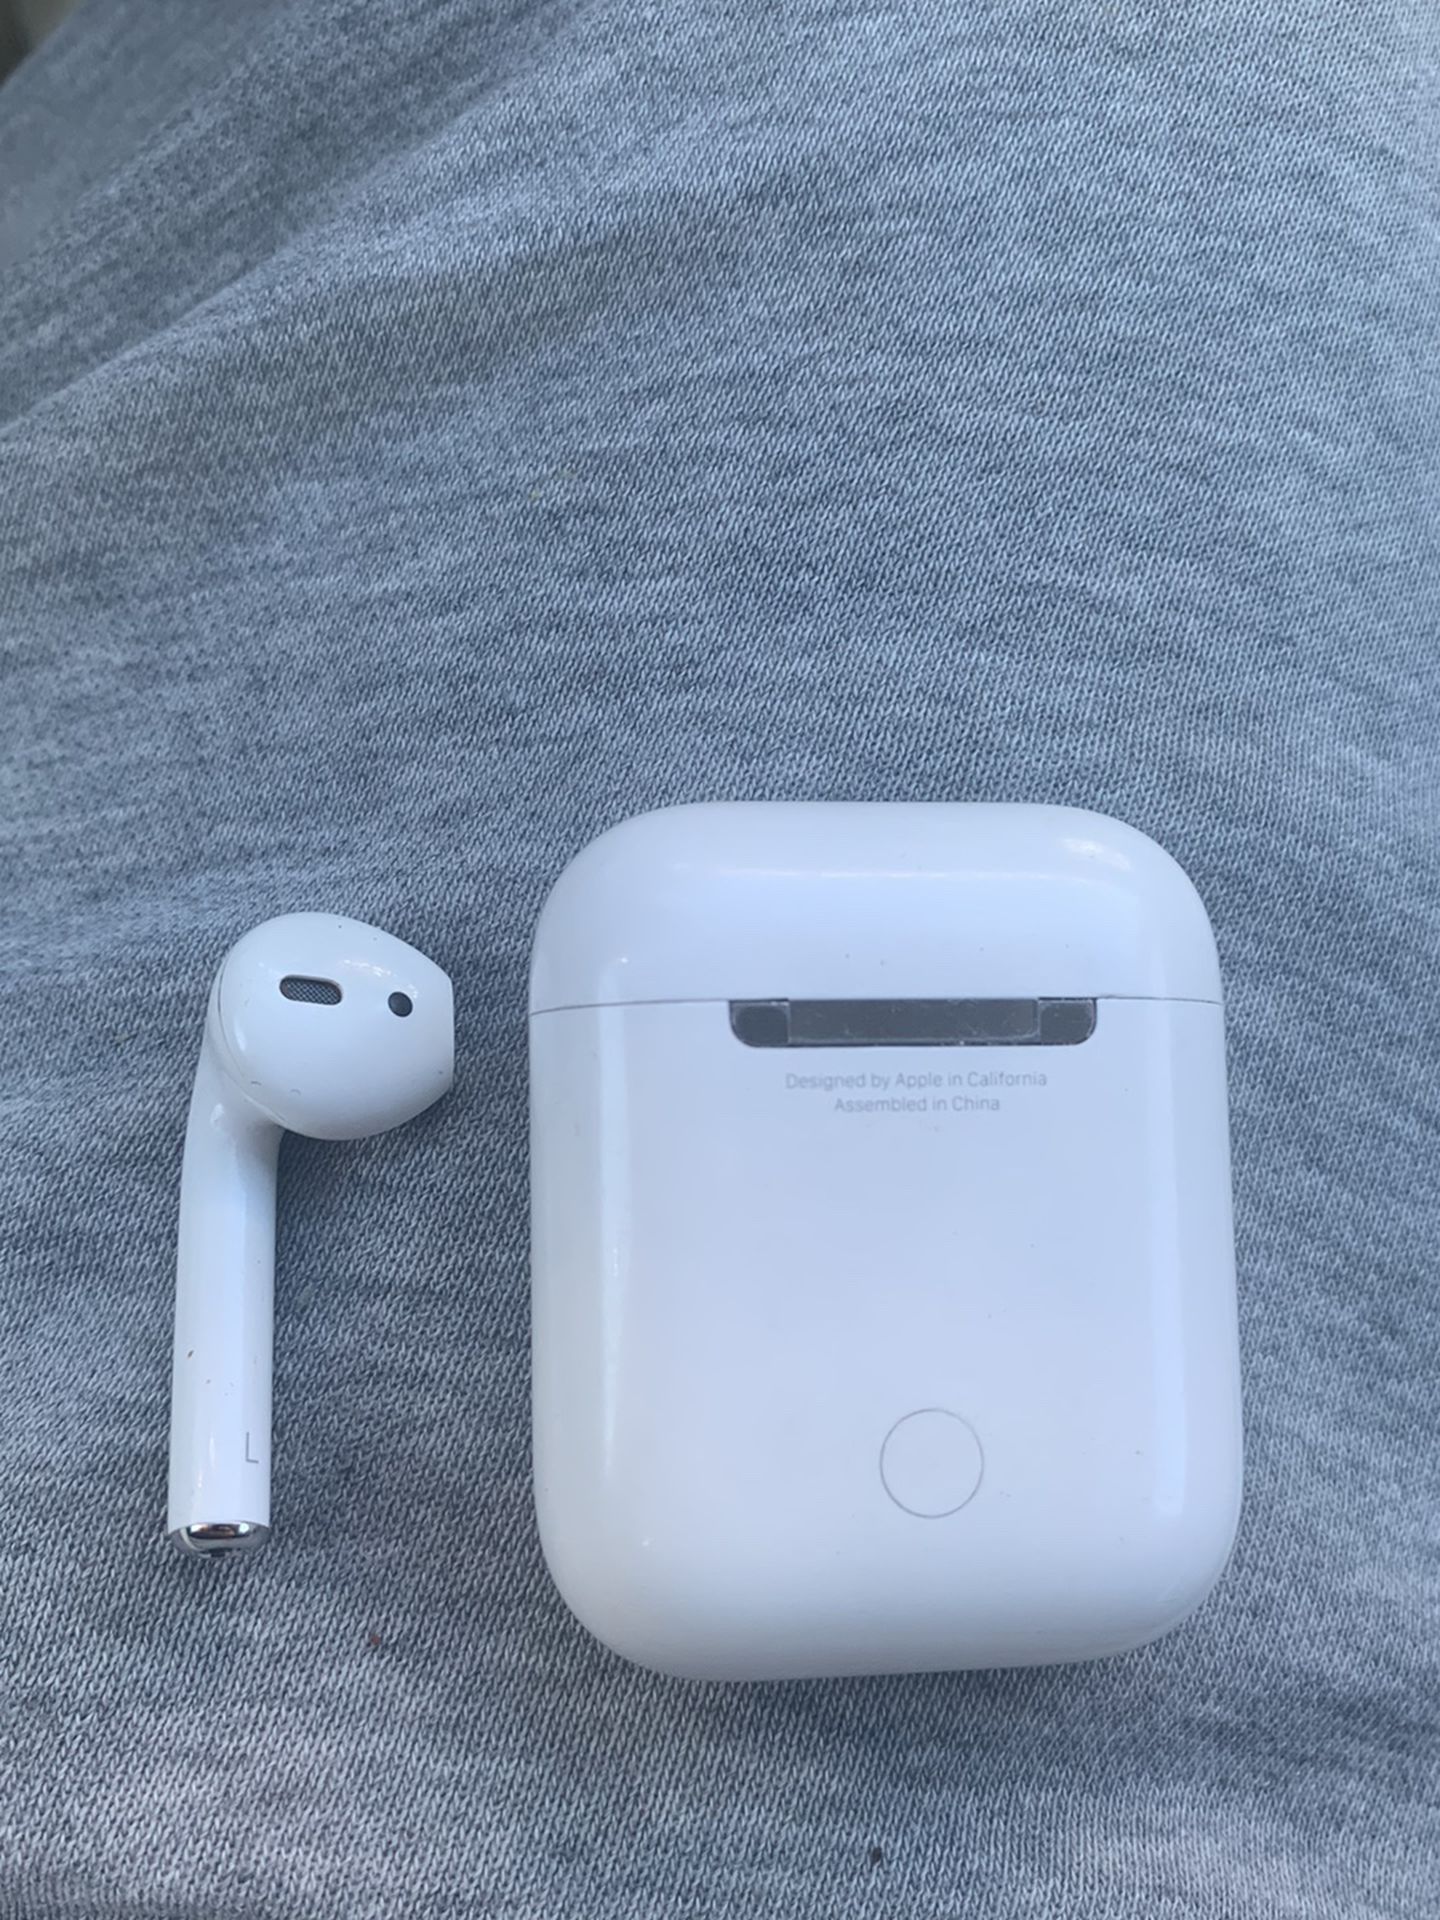 Apple Air Pods With Just Left Ear Piece